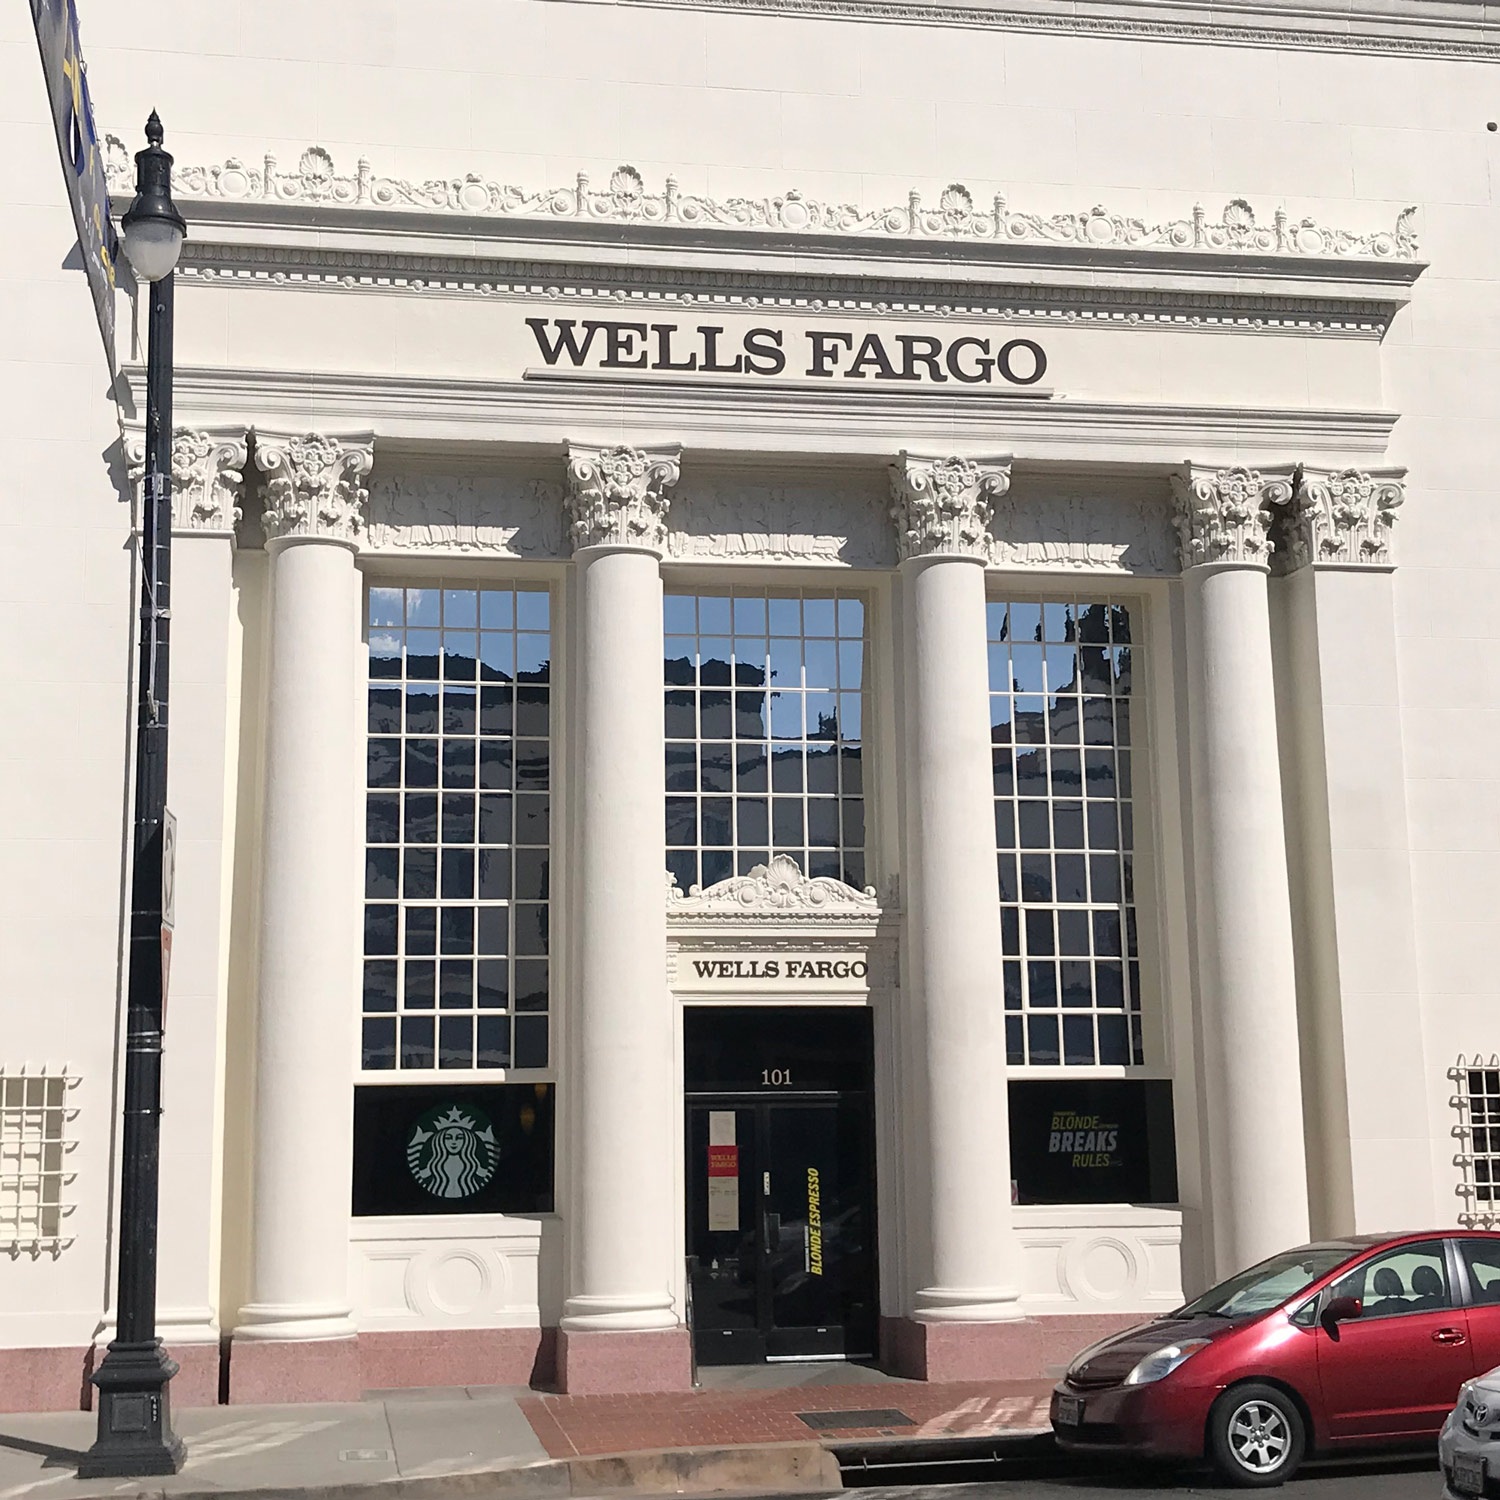 Wells Fargo Building with Reflective Tinted Windows